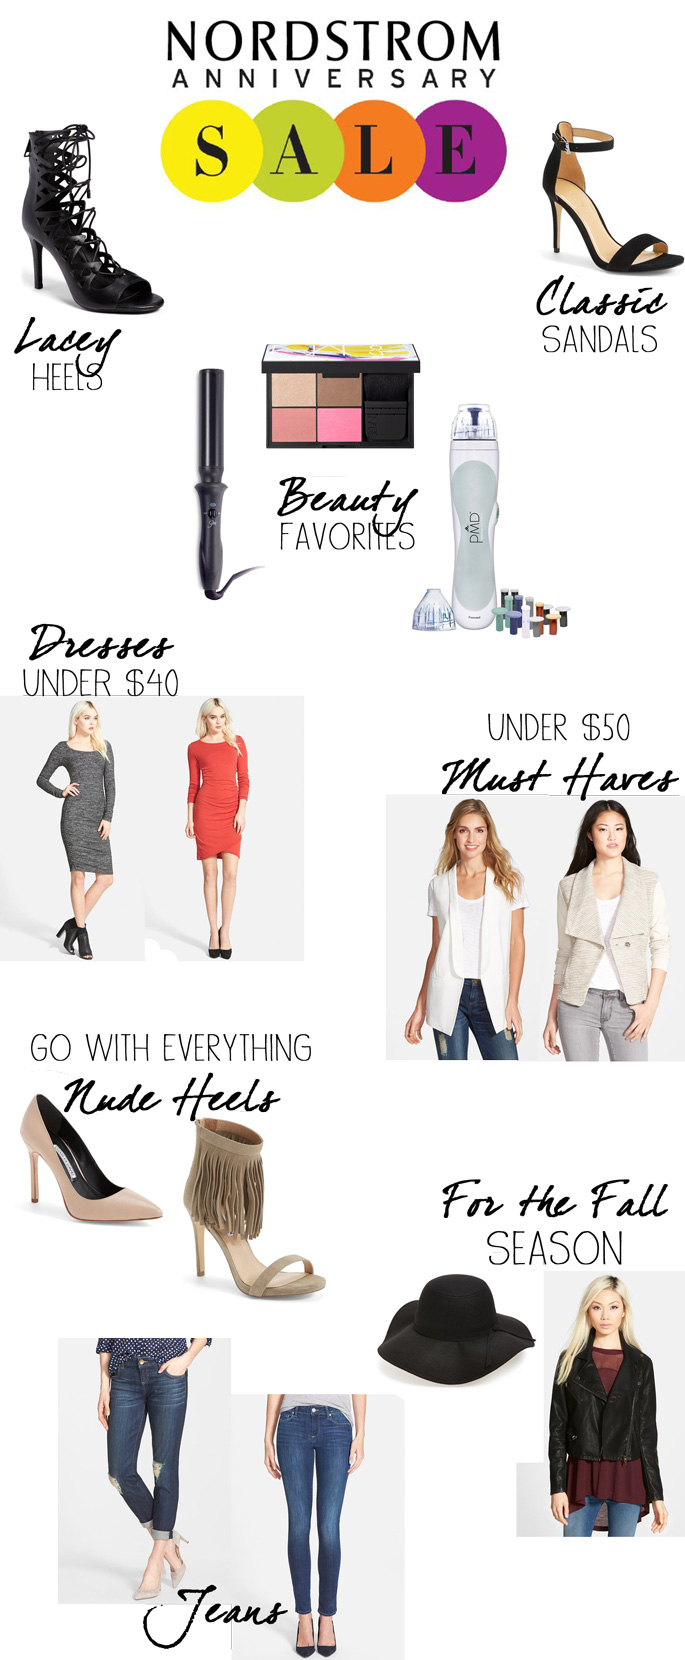 Nordstrom Anniversary Sale | The Classified Chic